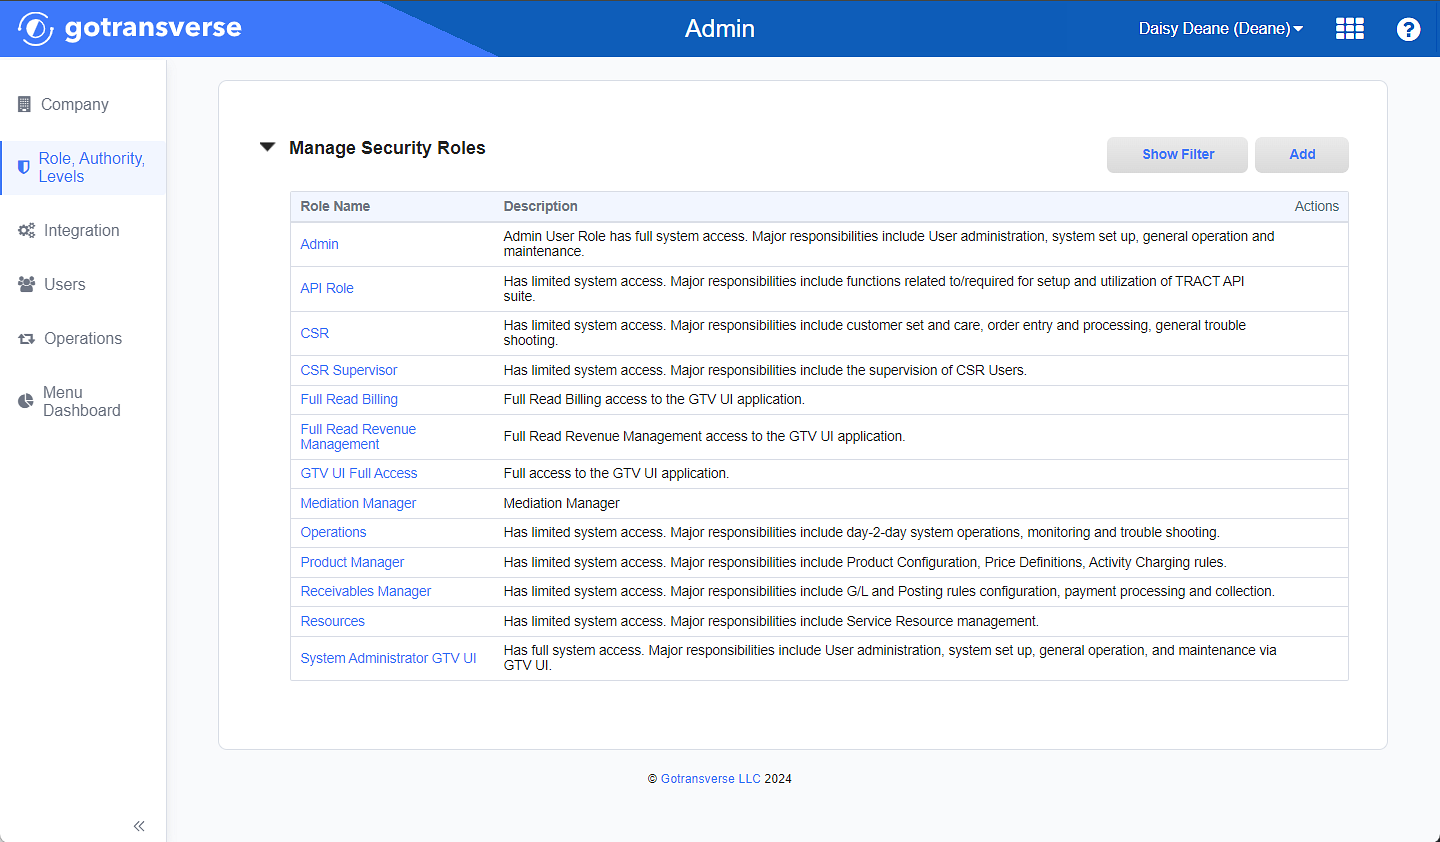 Manage Security Roles Pane